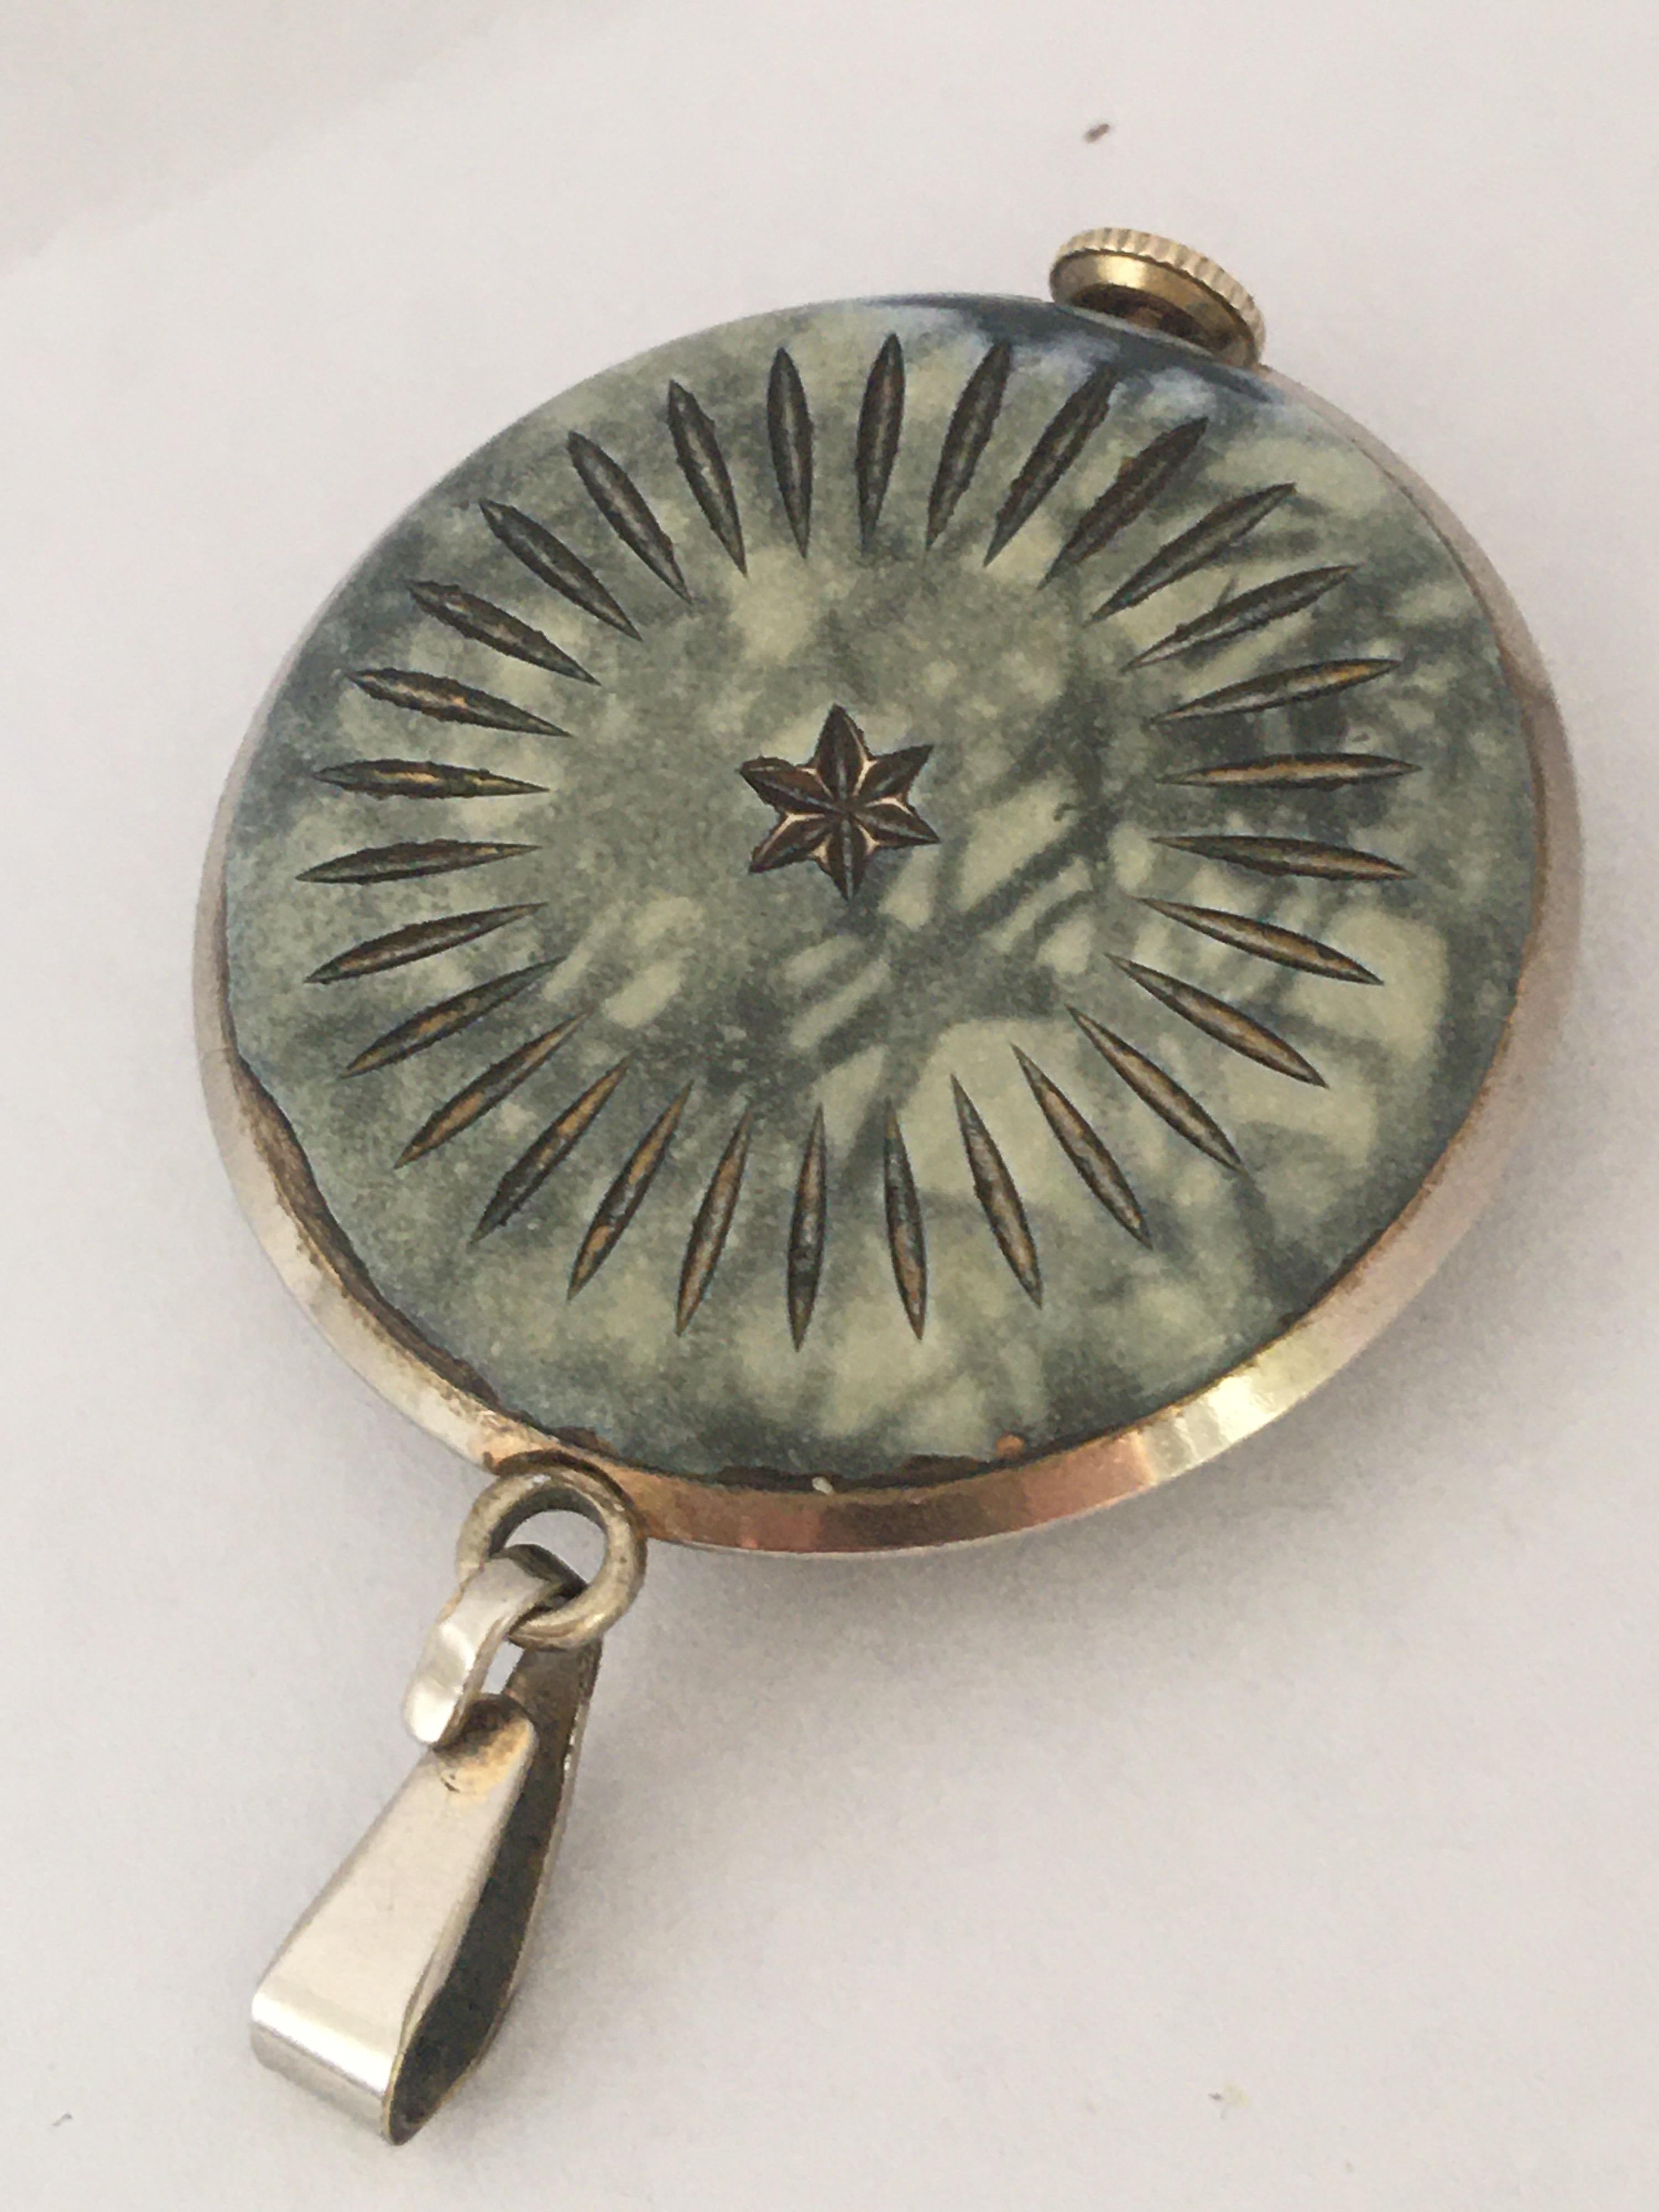 This beautiful vintage hand winding pendant watch is in good working condition and it is running well. It keeps a good time. Visible signs of ageing and wear with some scratches on the glass and on the enamel casing as shown. Some deterioration and